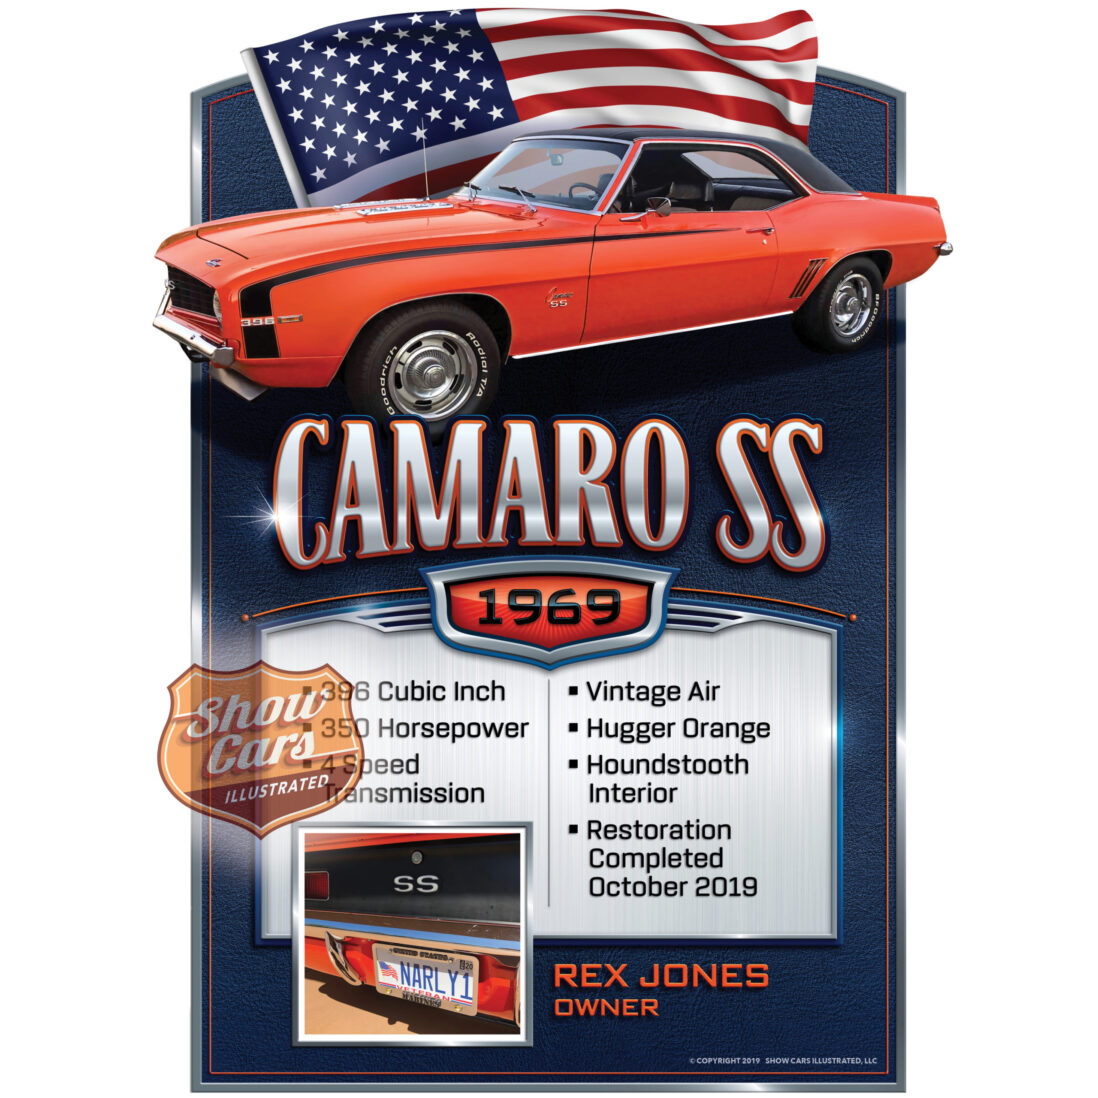 1969-Camaro-SS-All-American-Theme-Show-Cars-Illustrated-Car-Show-Signs-1000px